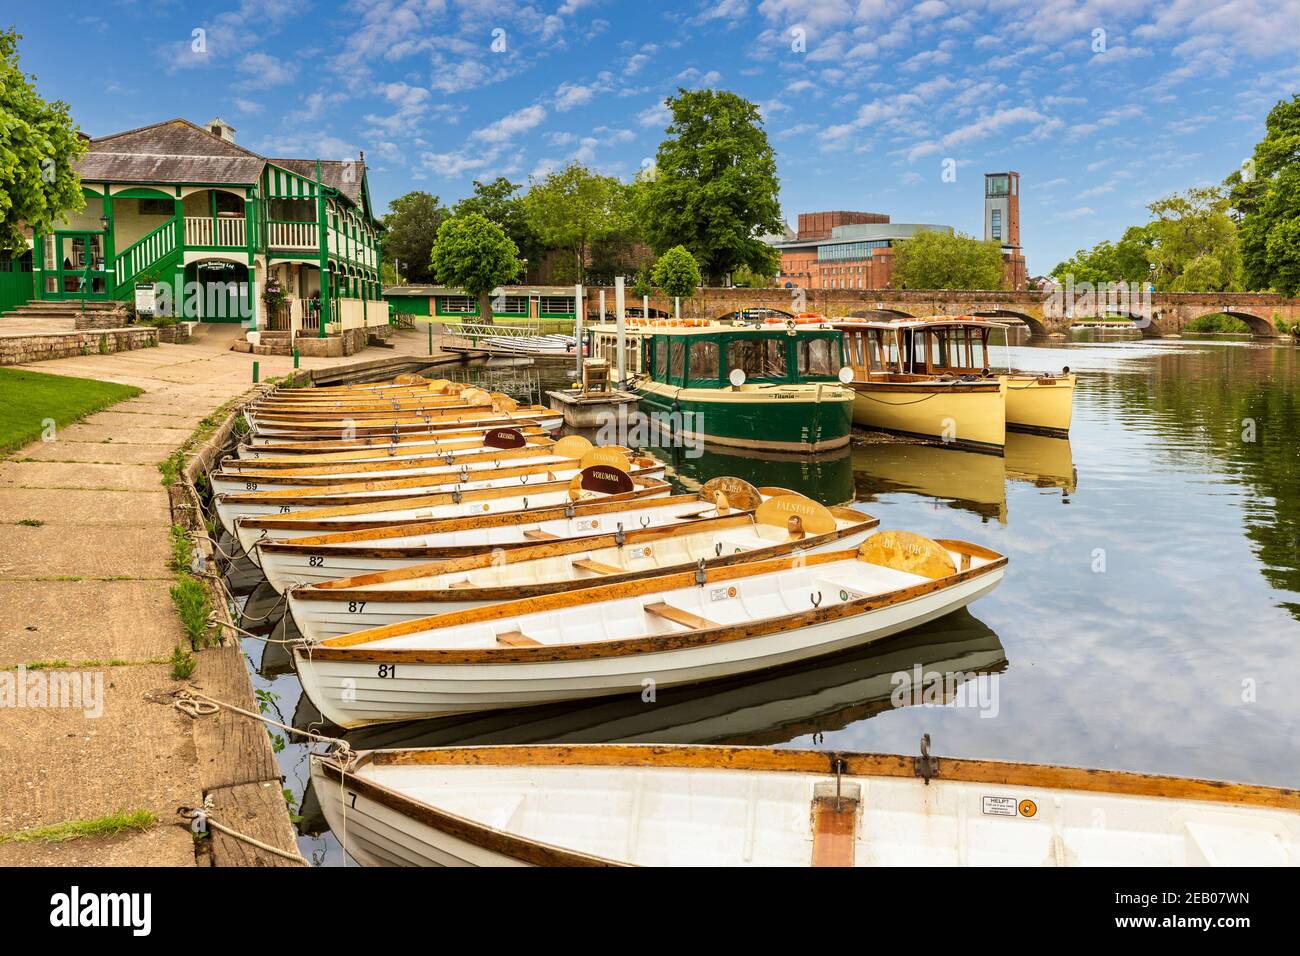 Rowing boats moored on the River Avon with the RSC Theatre and Tramway in the background, Stratford Upon Avon, England Stock Photo